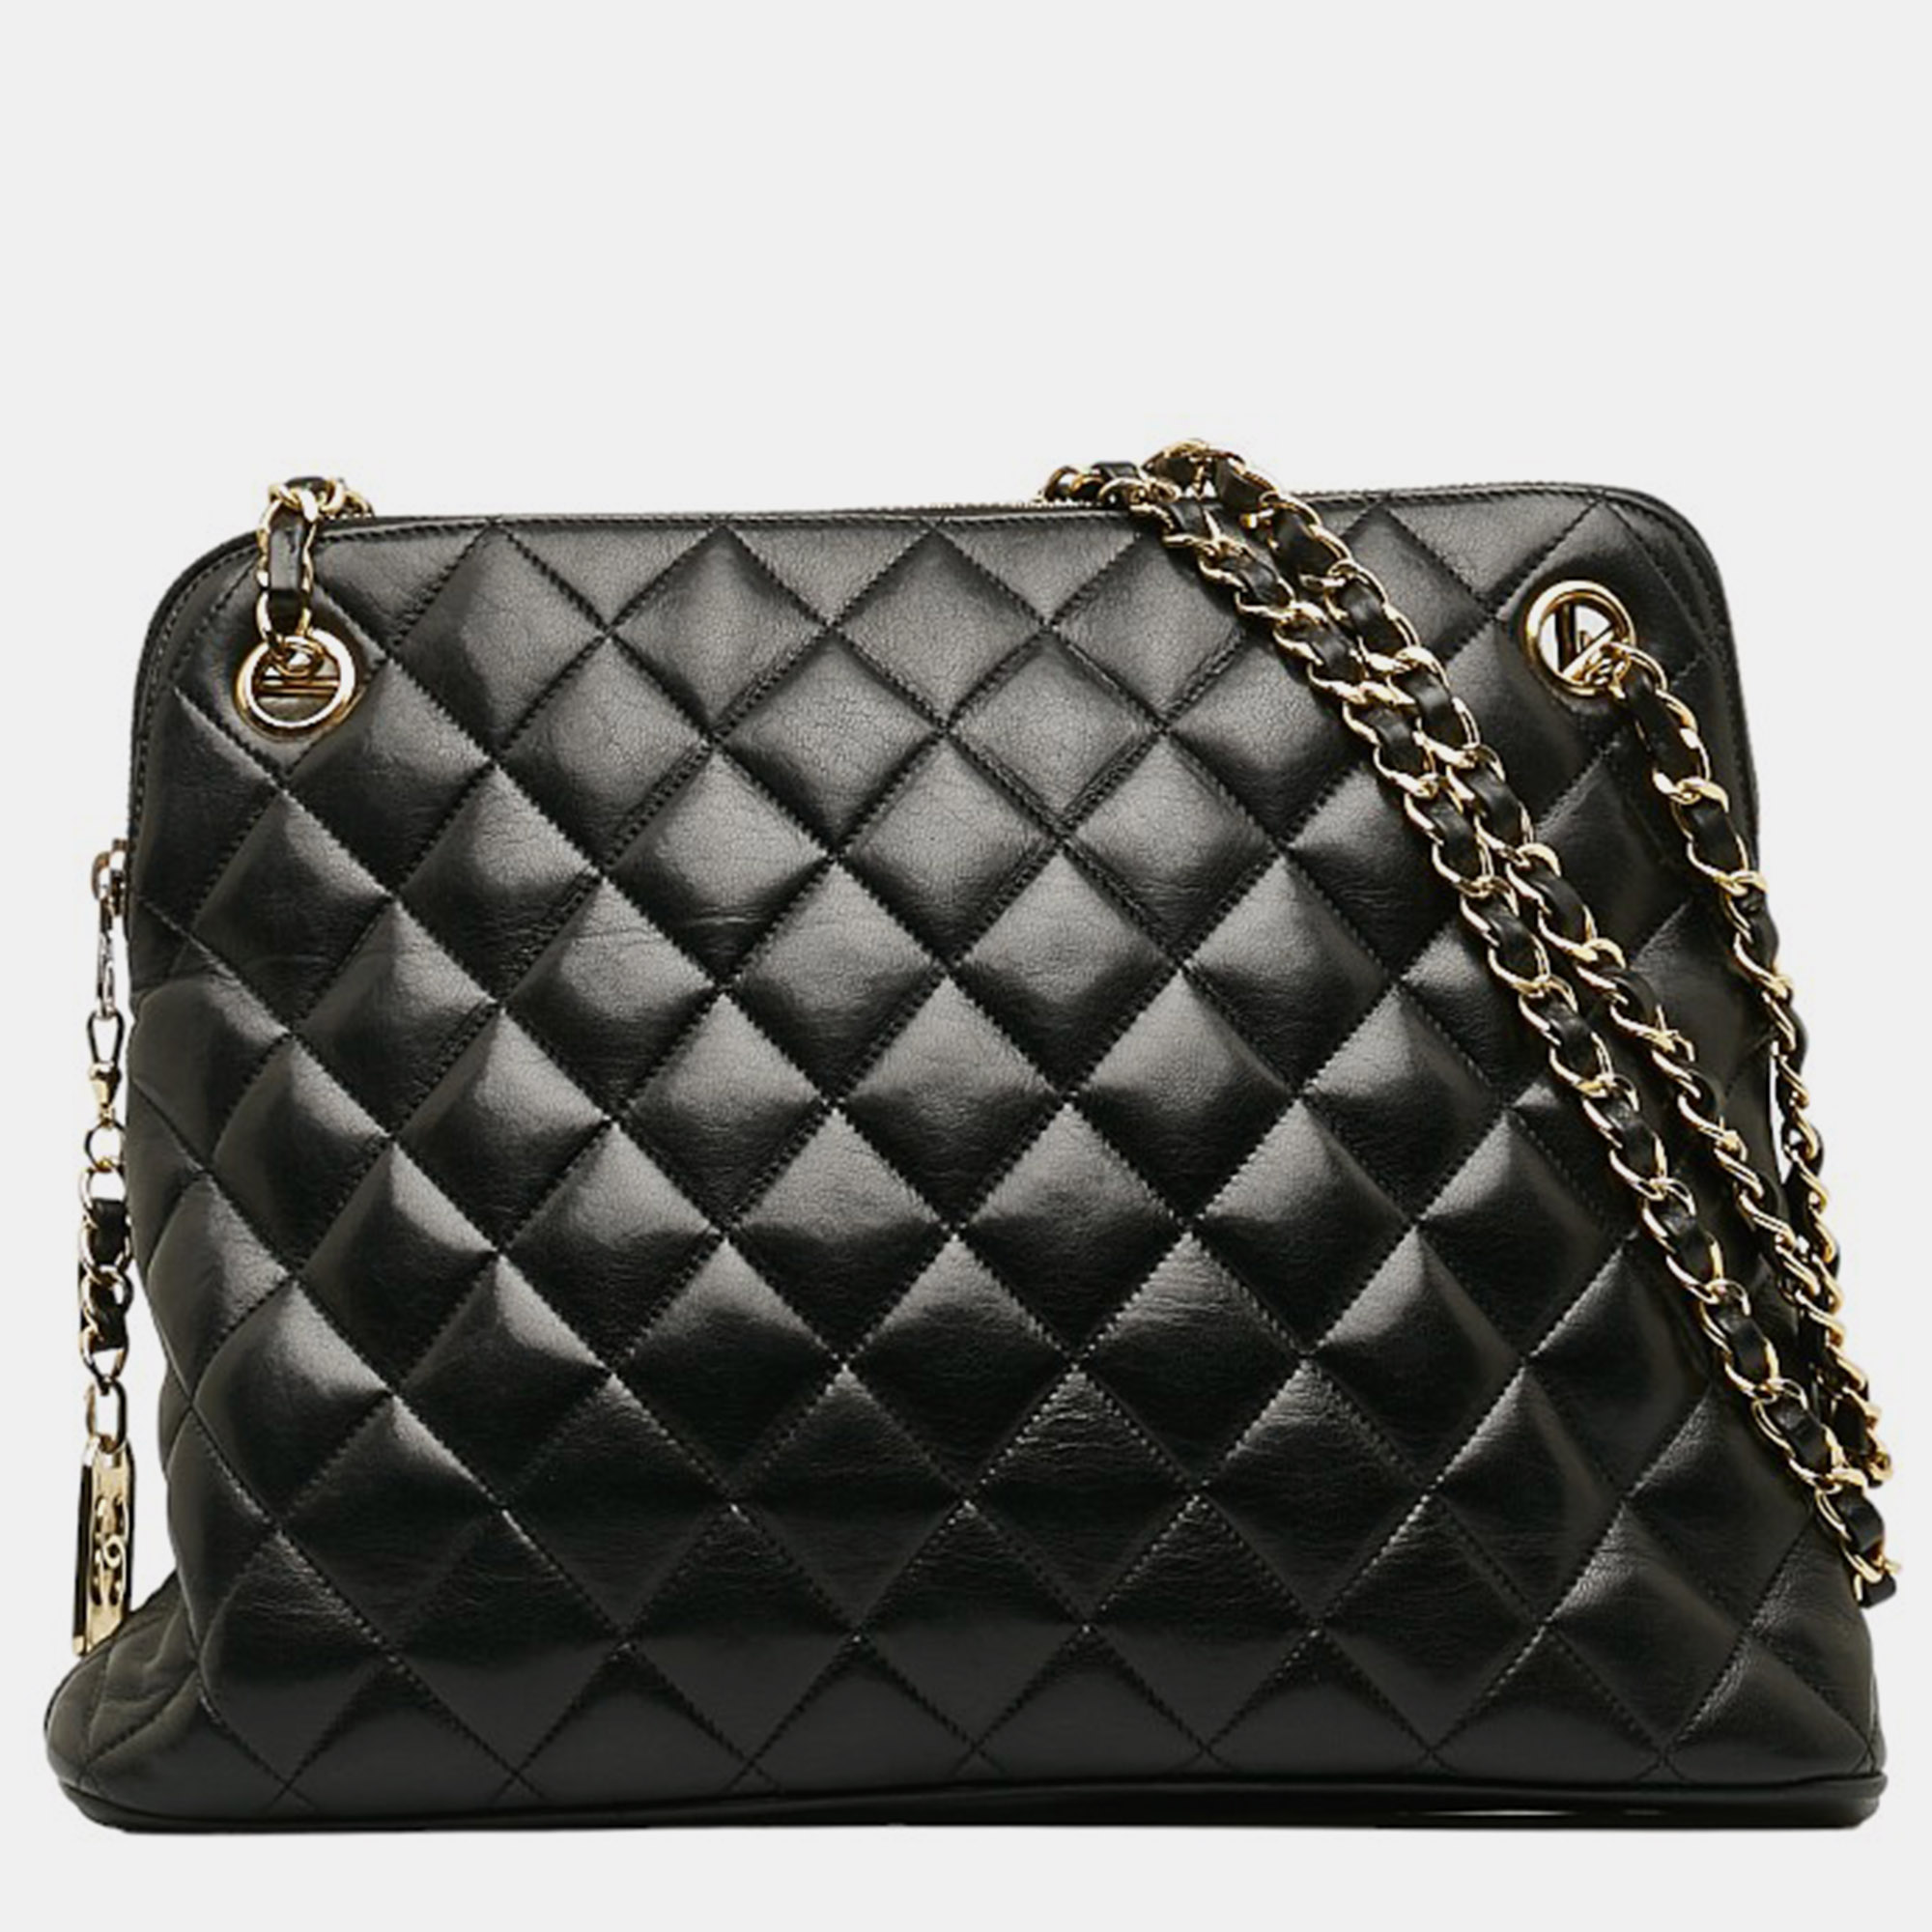 

Chanel Black Quilted Leather Chain Shoulder Bag